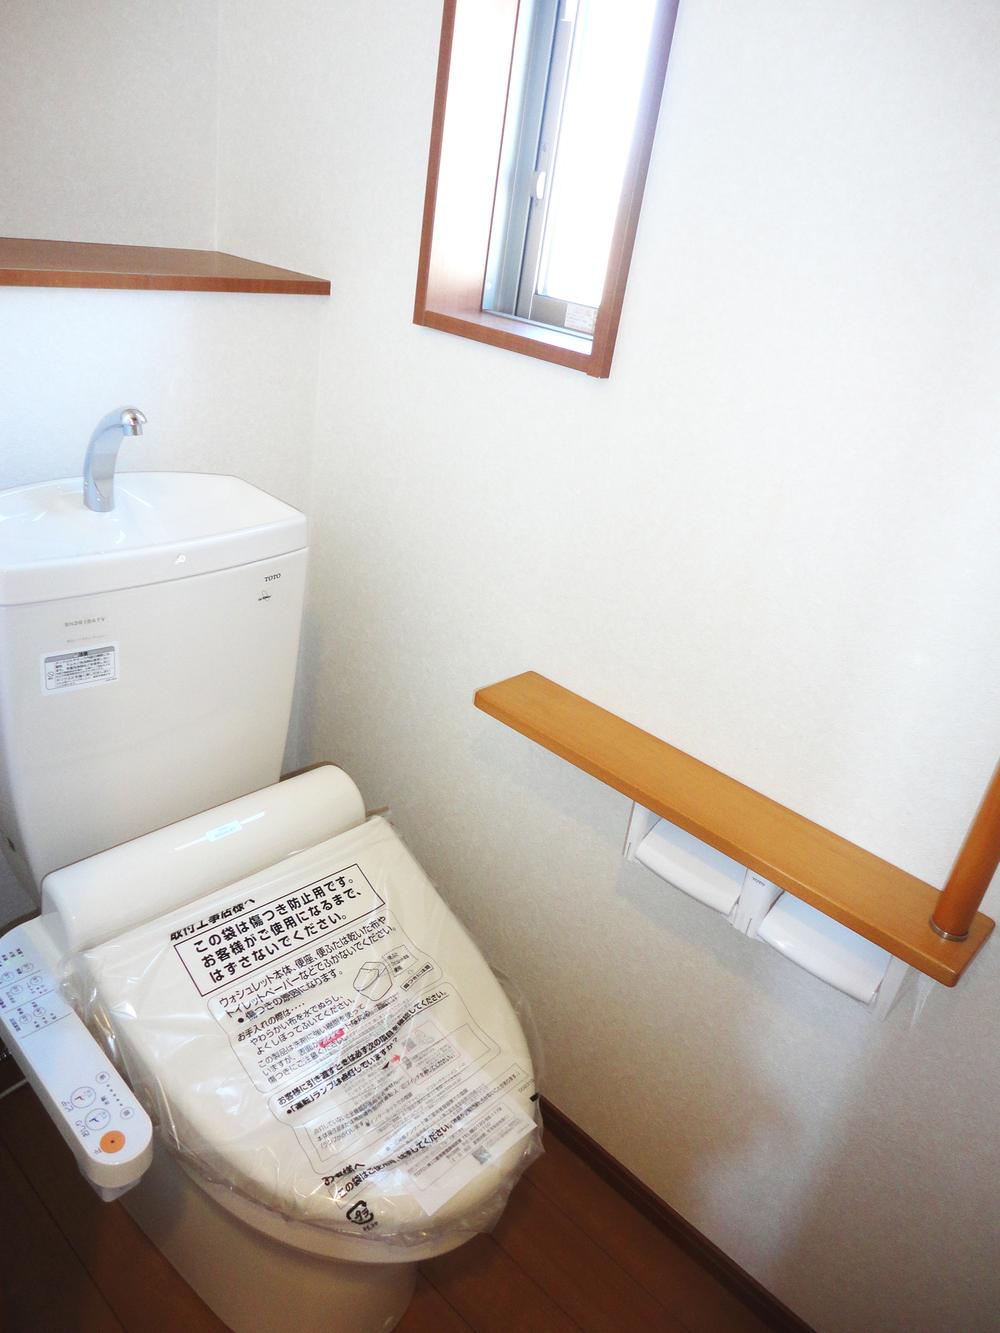 Toilet. Multi-function toilet - the same specification